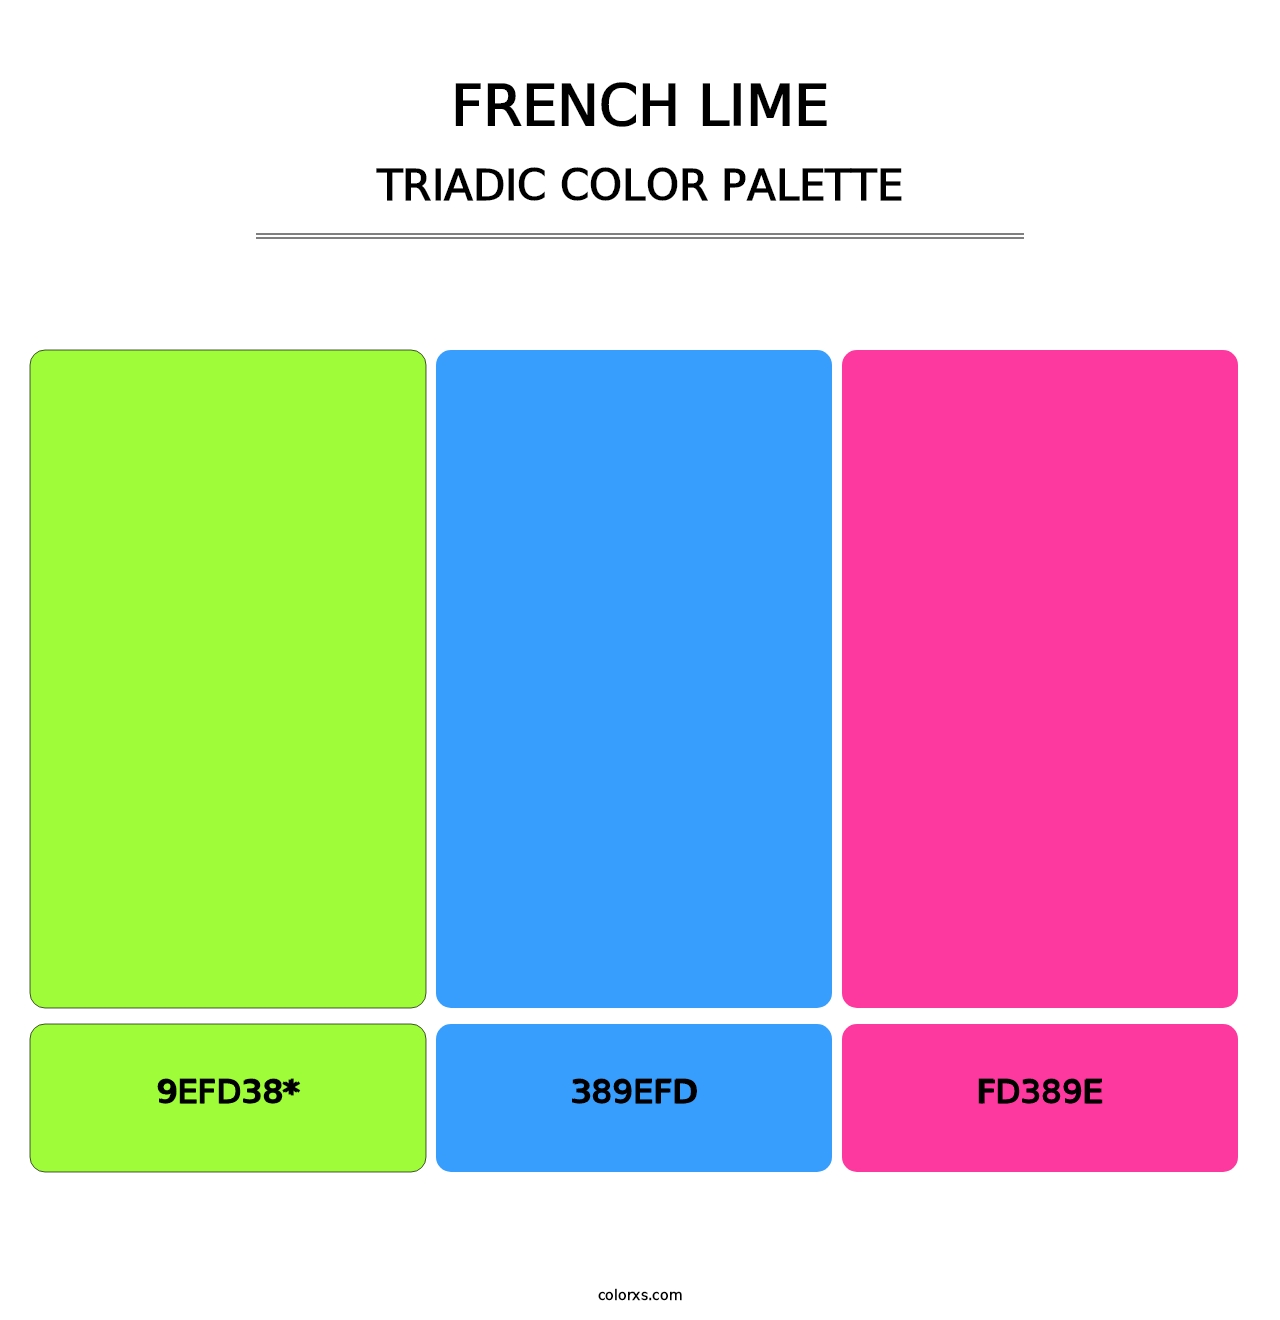 French Lime - Triadic Color Palette